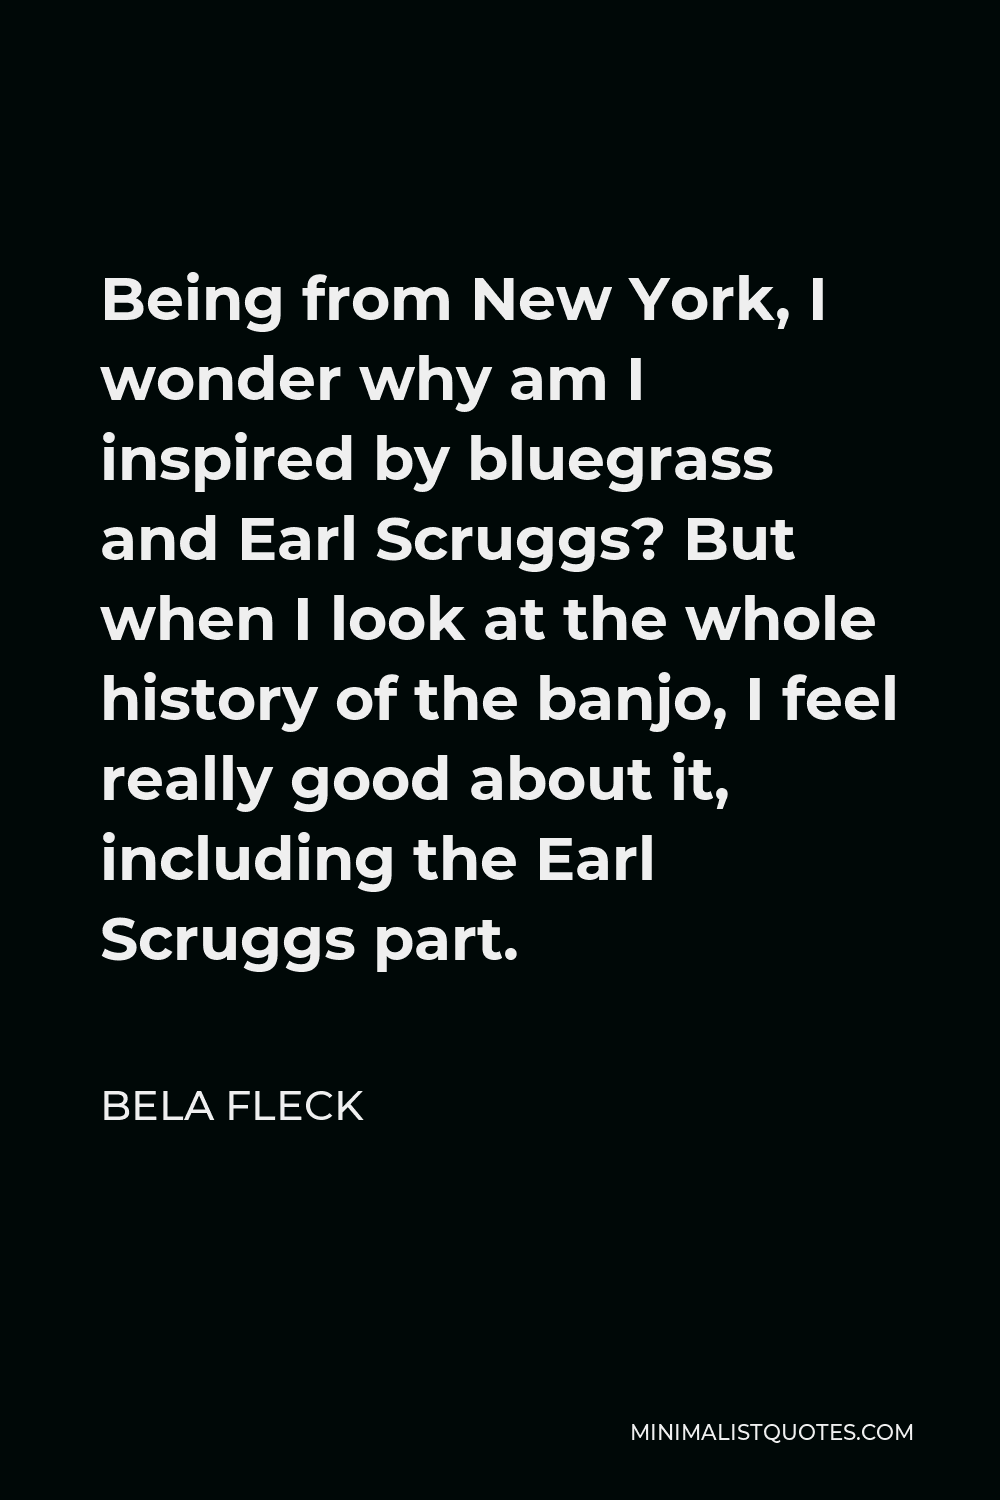 Bela Fleck Quote - Being from New York, I wonder why am I inspired by bluegrass and Earl Scruggs? But when I look at the whole history of the banjo, I feel really good about it, including the Earl Scruggs part.